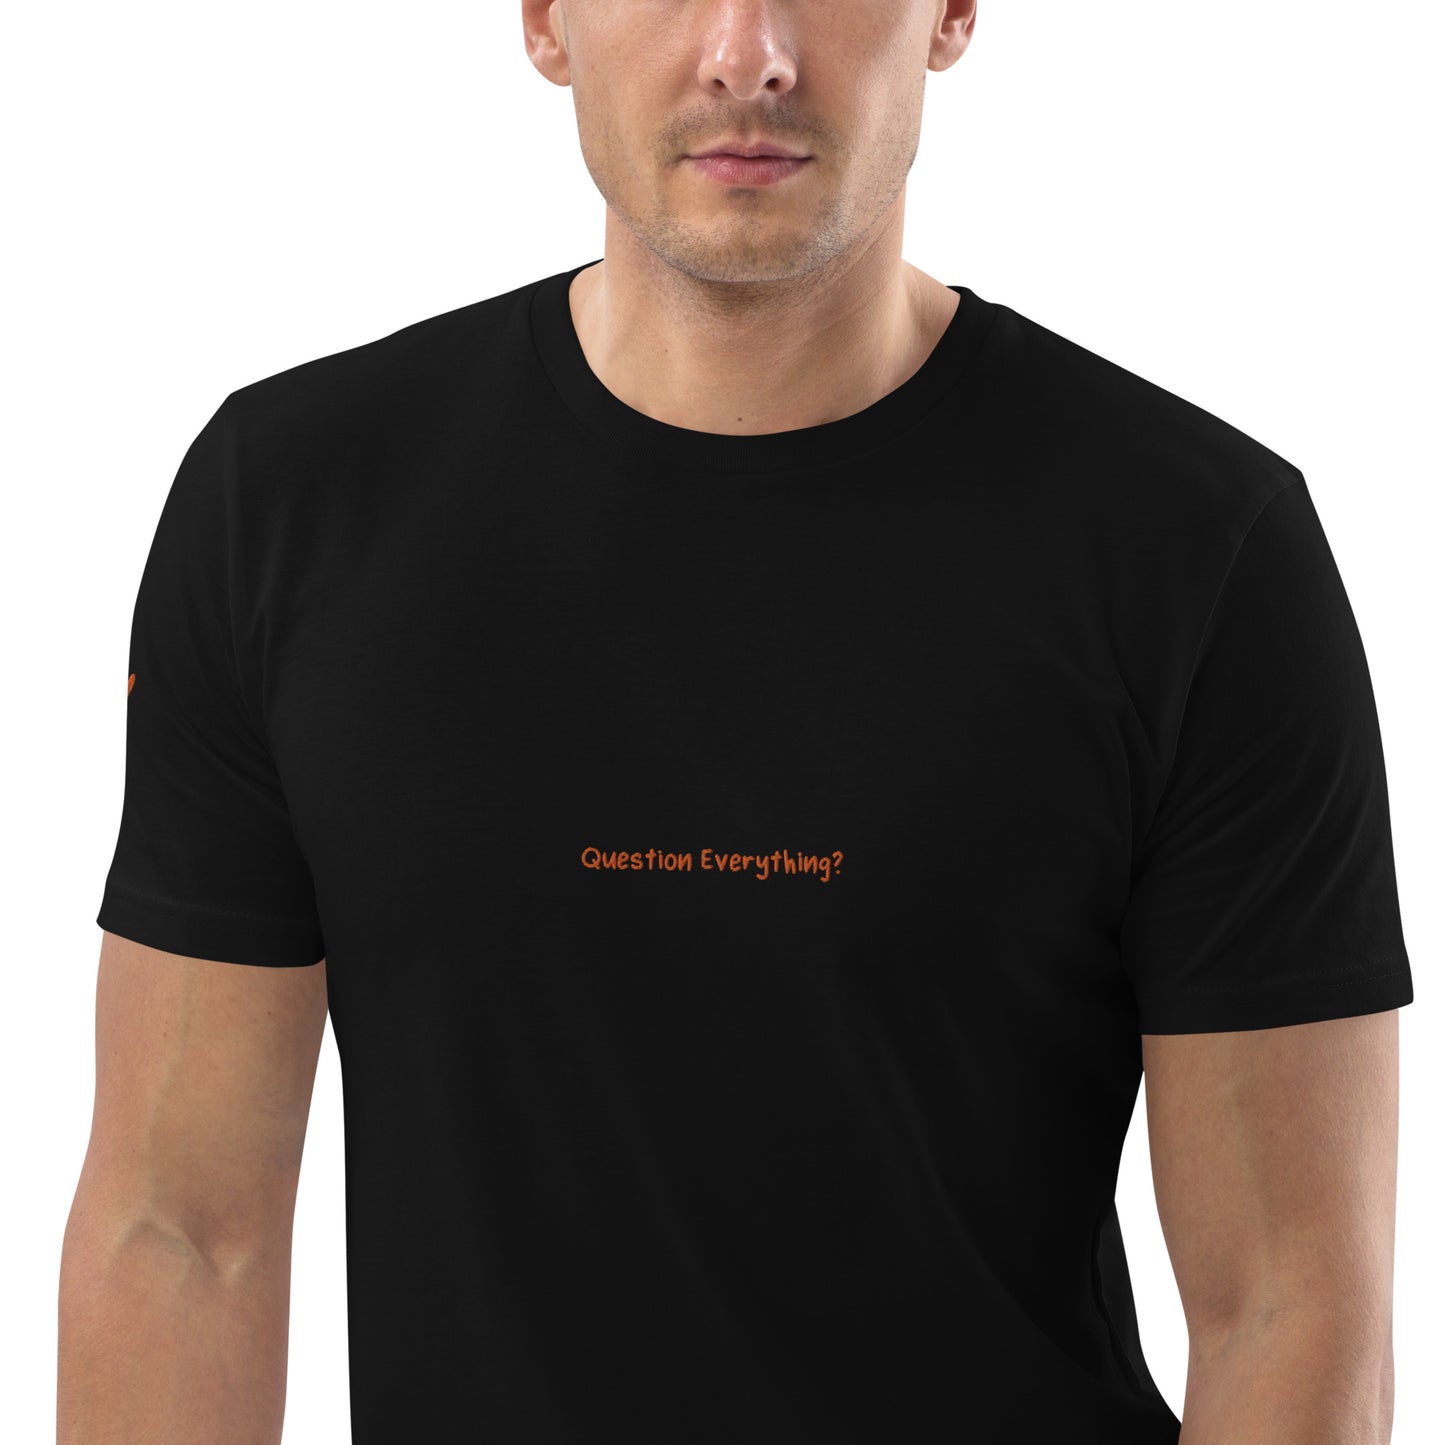 "Question Everything" organic cotton t-shirt - Limited Edition 1 of 1